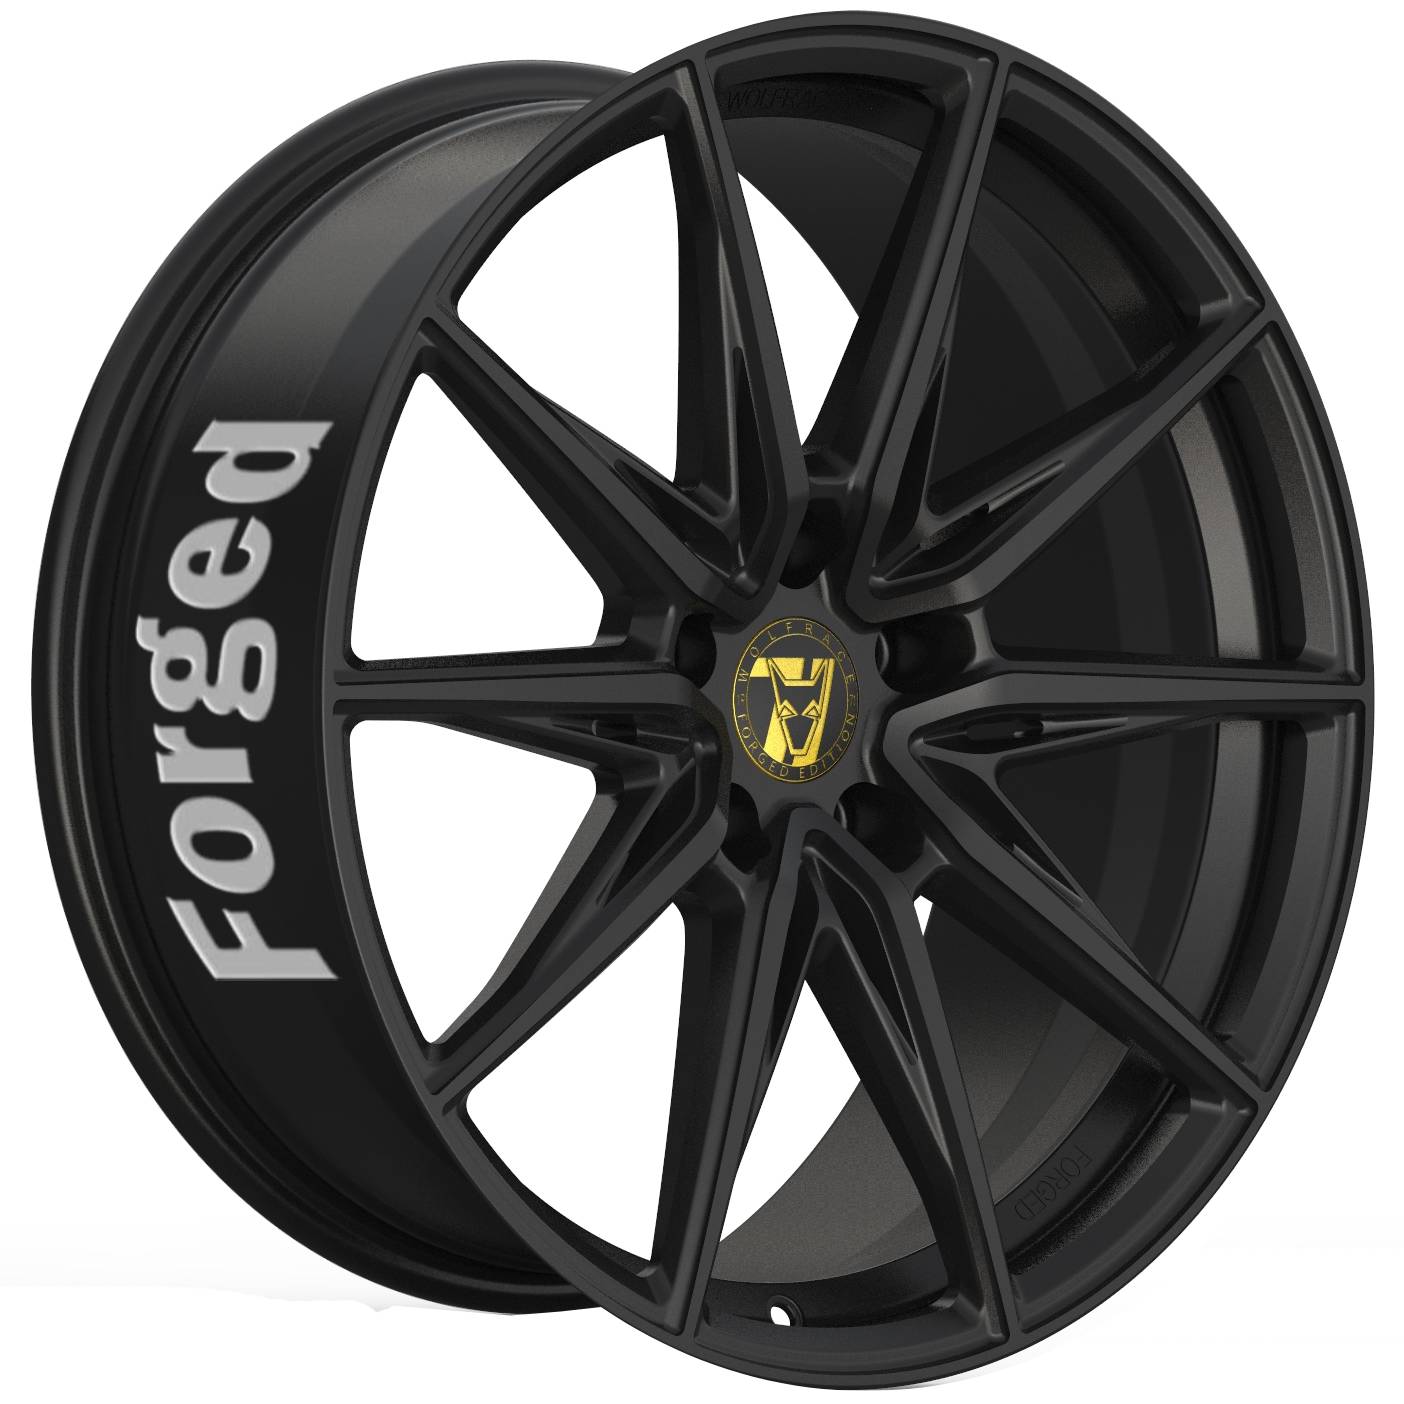 Jantes alu Demon Wheels 71 Forged Edition Urban Racer Forged [13x23] -5x114.3- ET 40